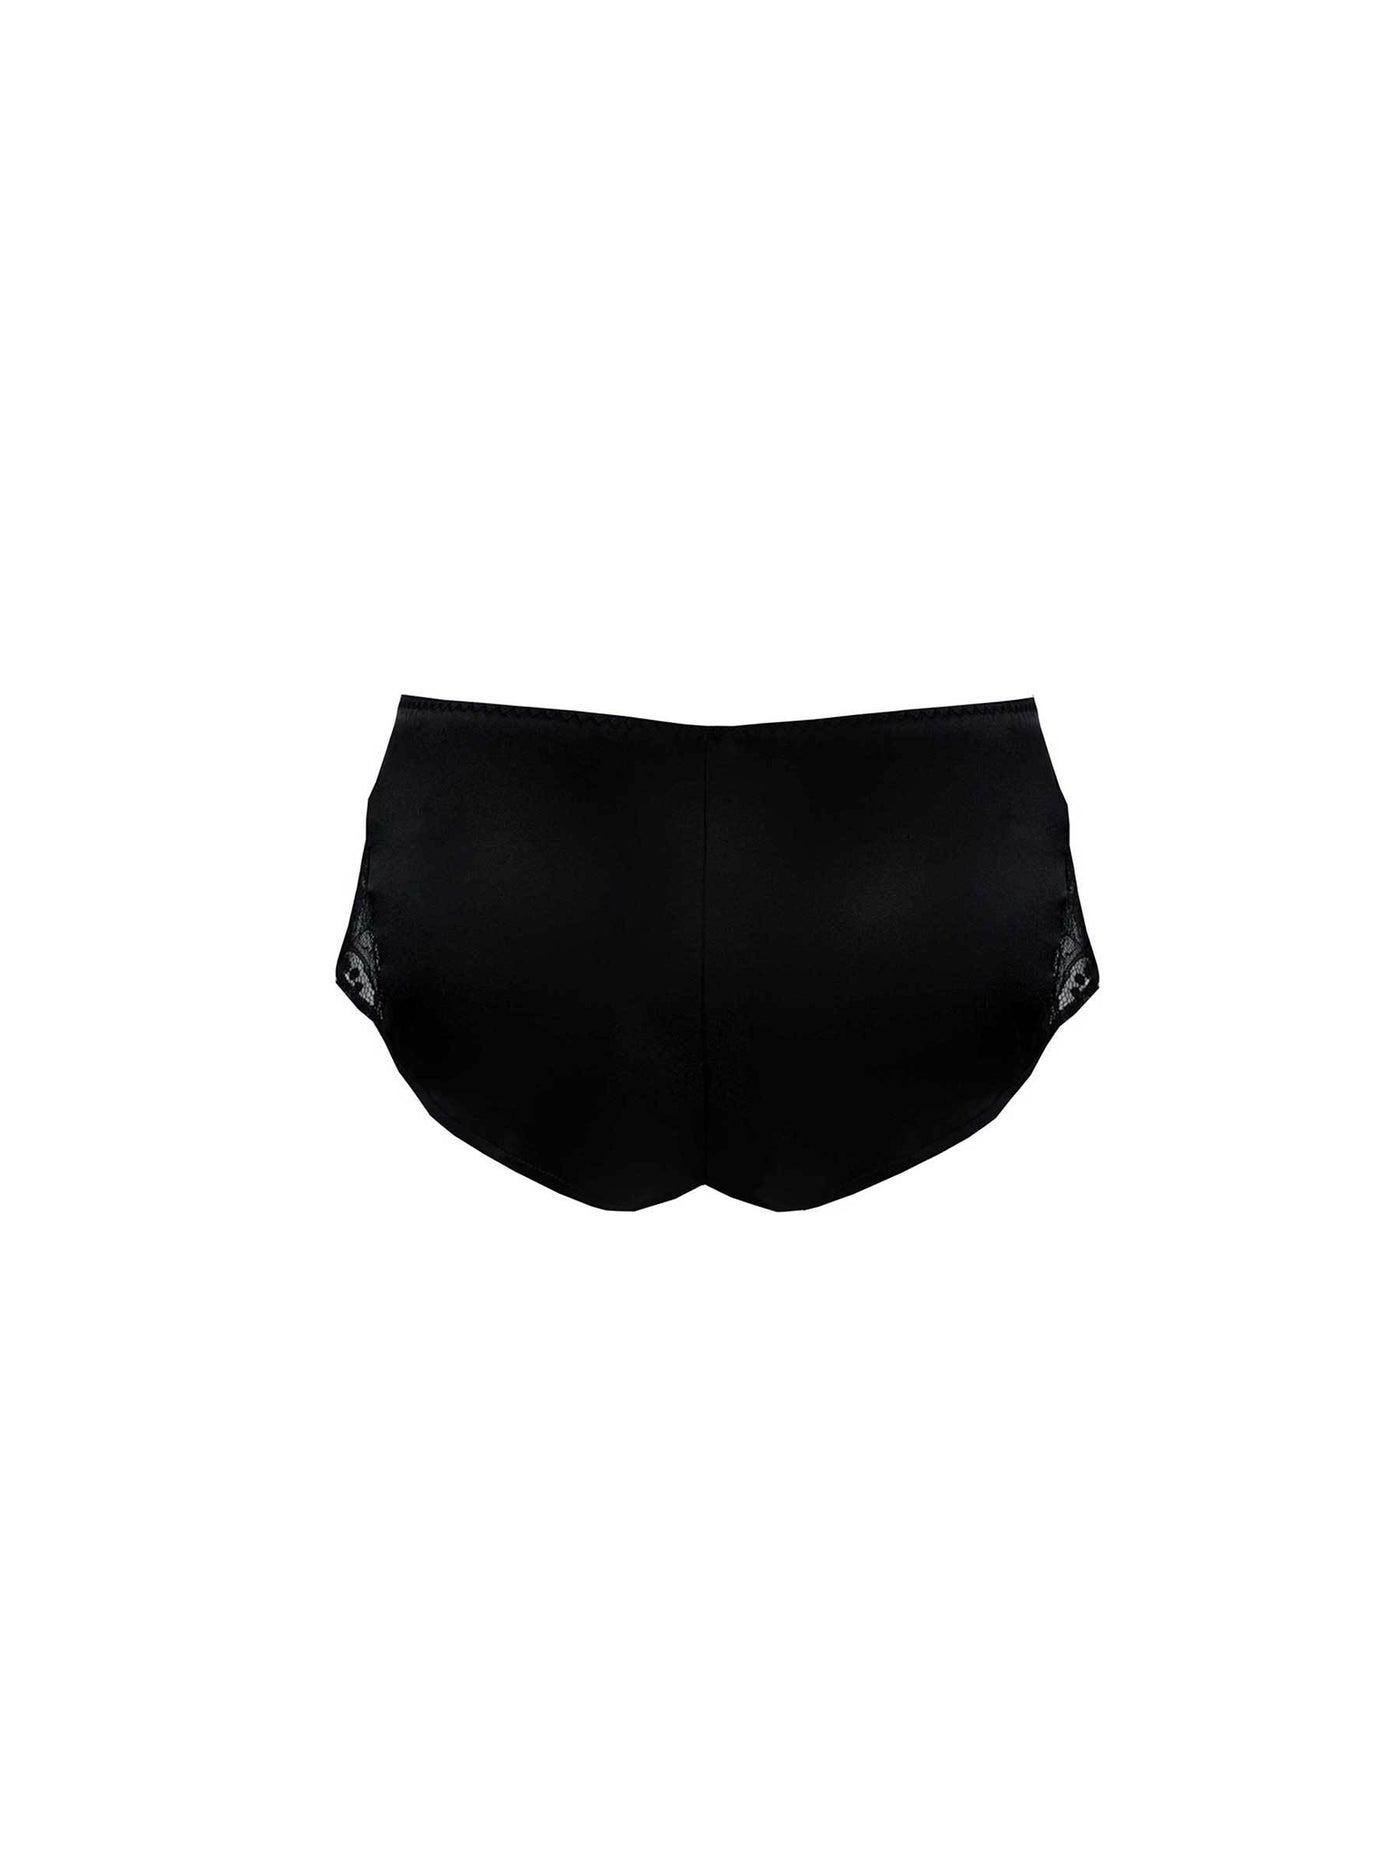 Fleur of England Signature French Knickers - Black